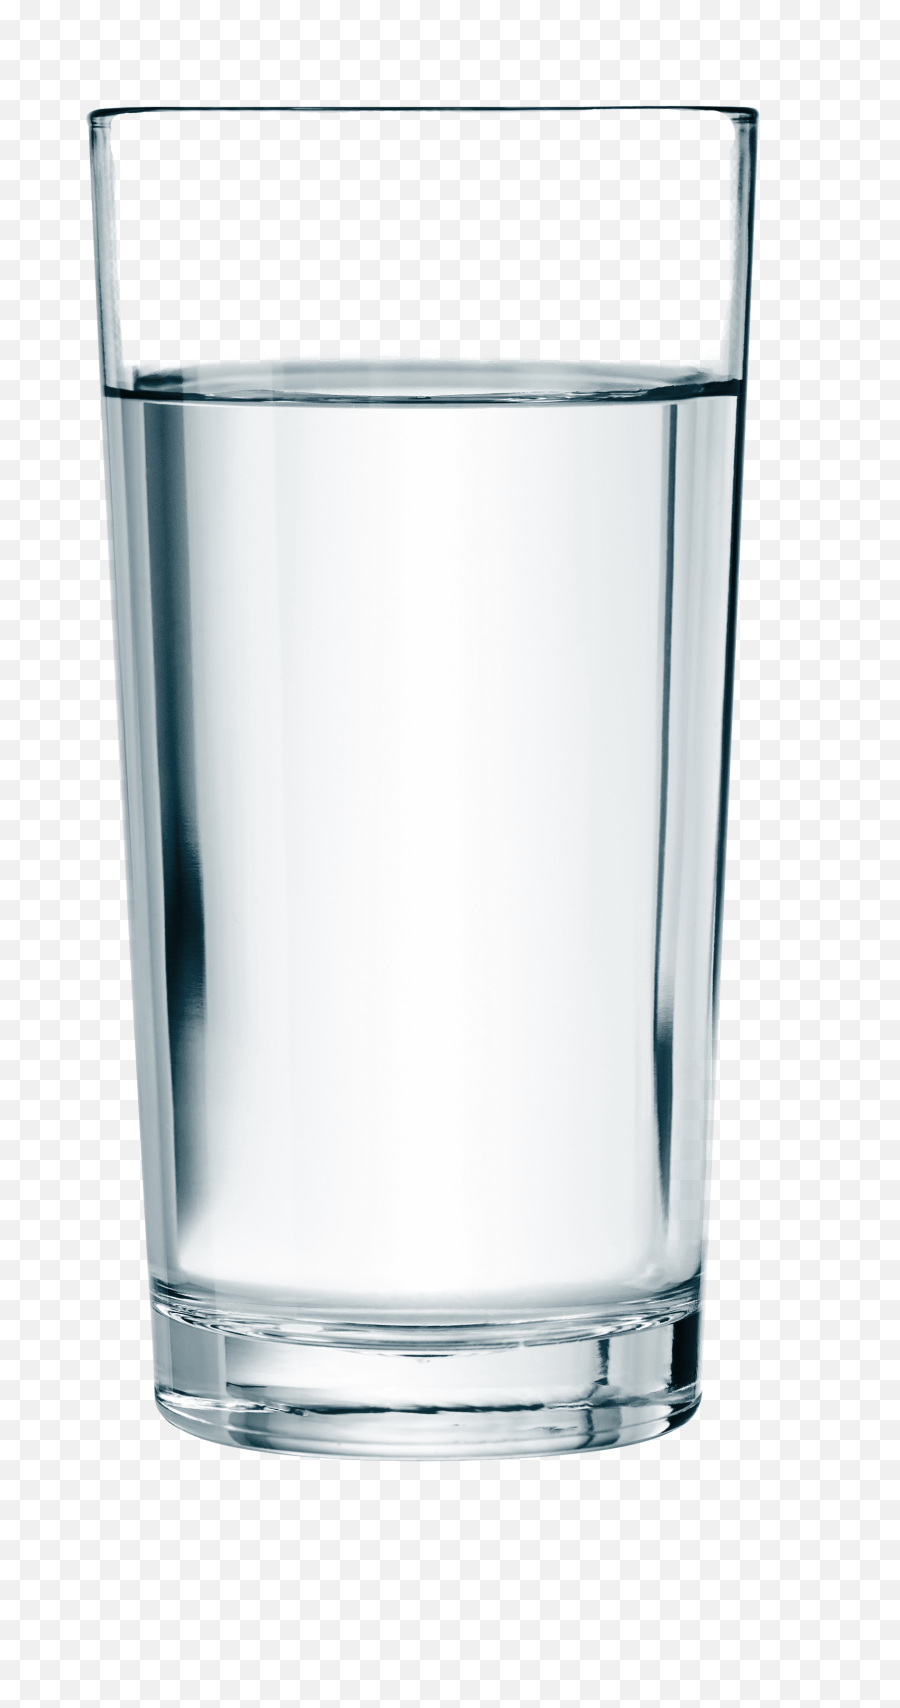 Cup Glass Drinking Water - Champagne Glass Png Download Highball Glass Transparent Background Emoji,Emoji Drinking Water